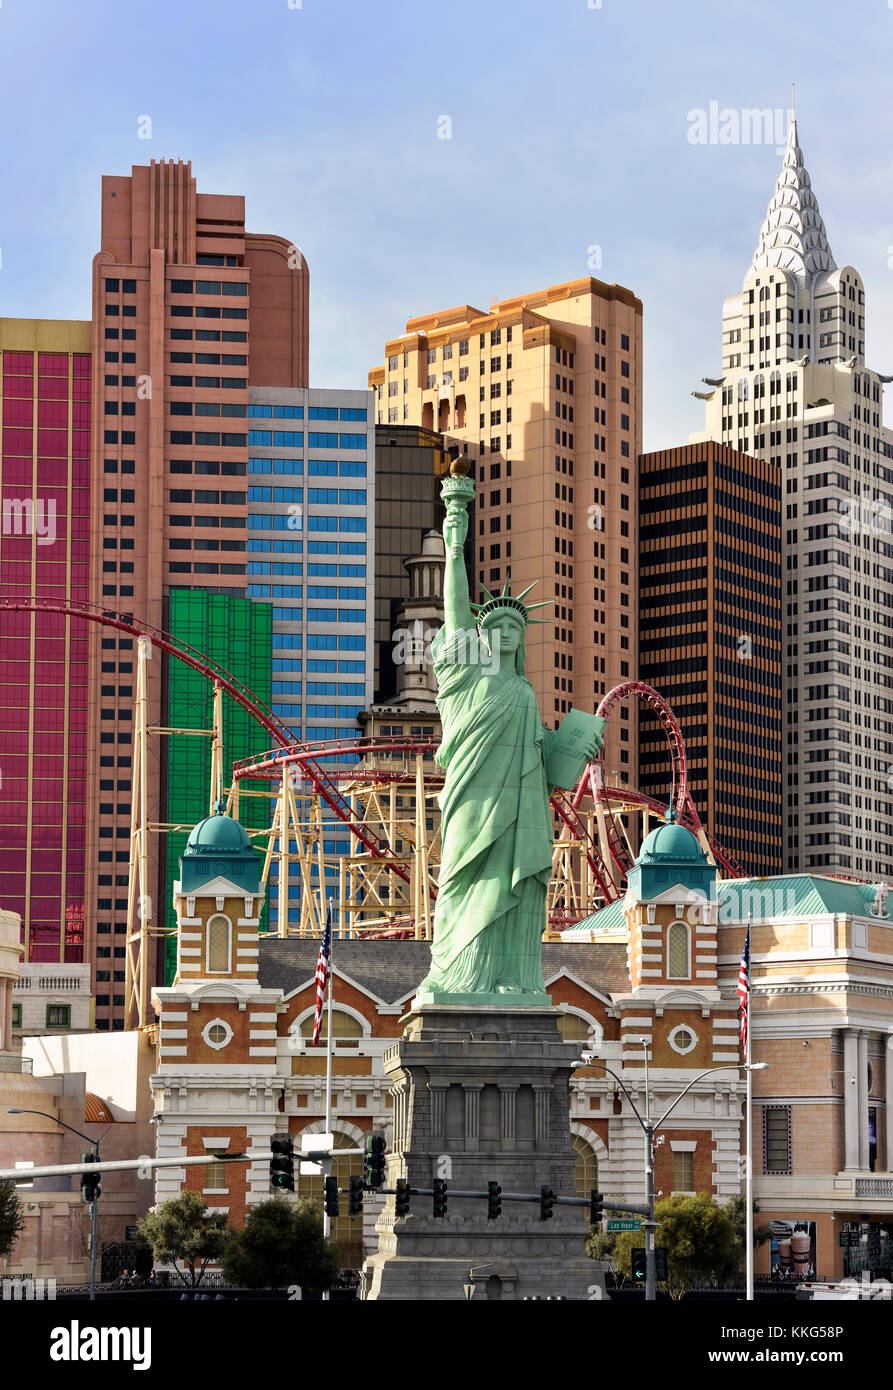 Day time view of New York New York Las Vegas with Statue of Liberty Stock Photo